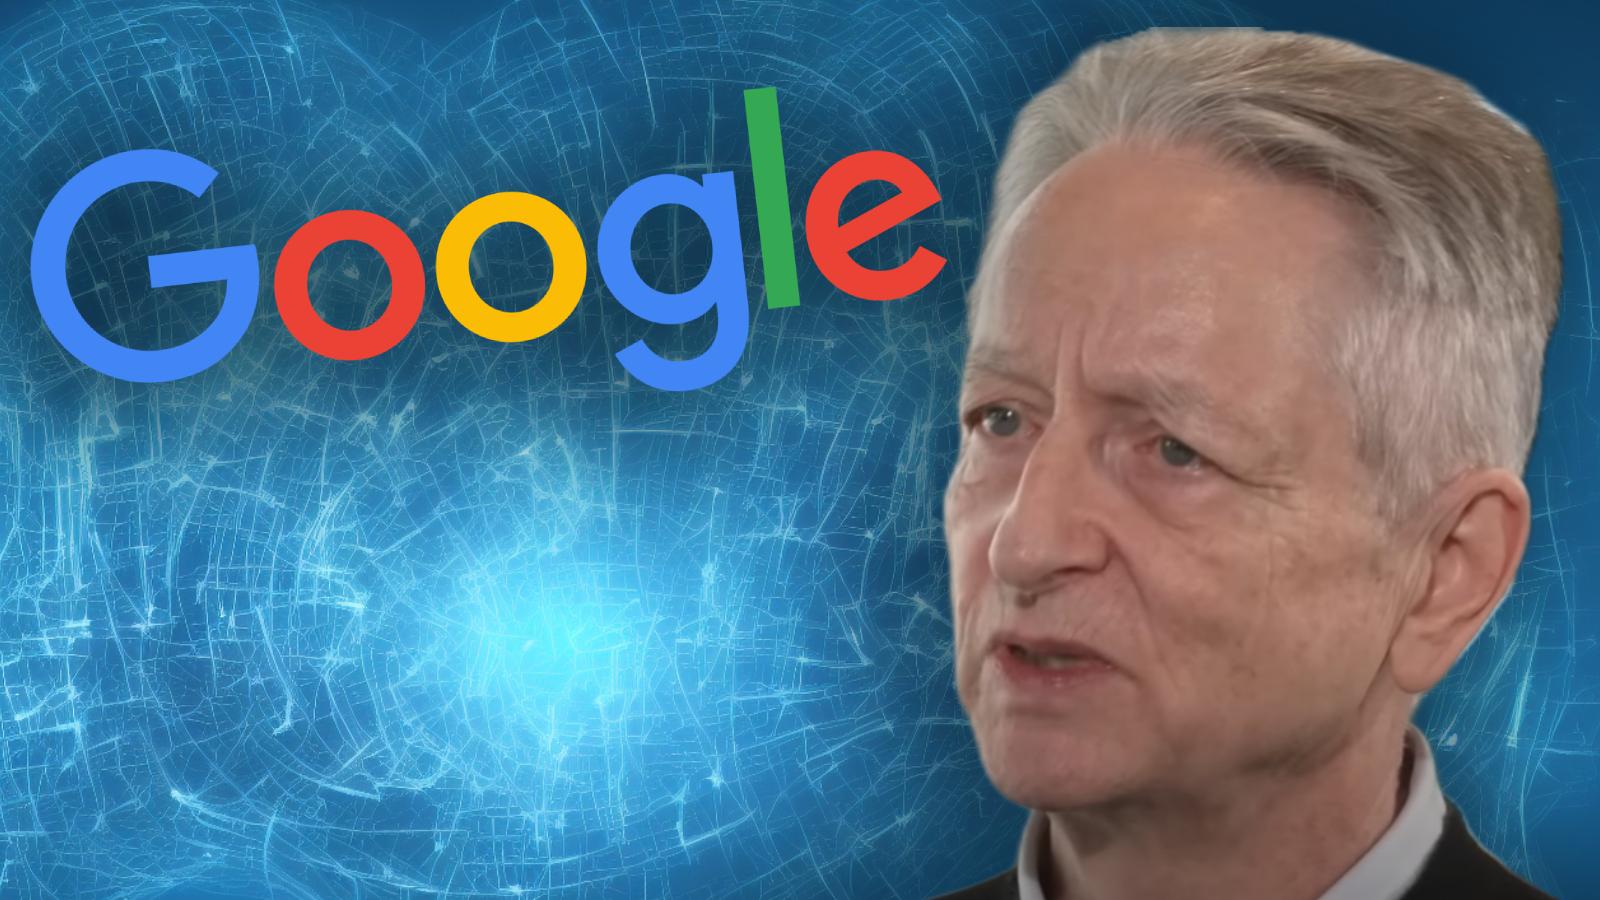 Geoff Hinton with Google logo on blue background